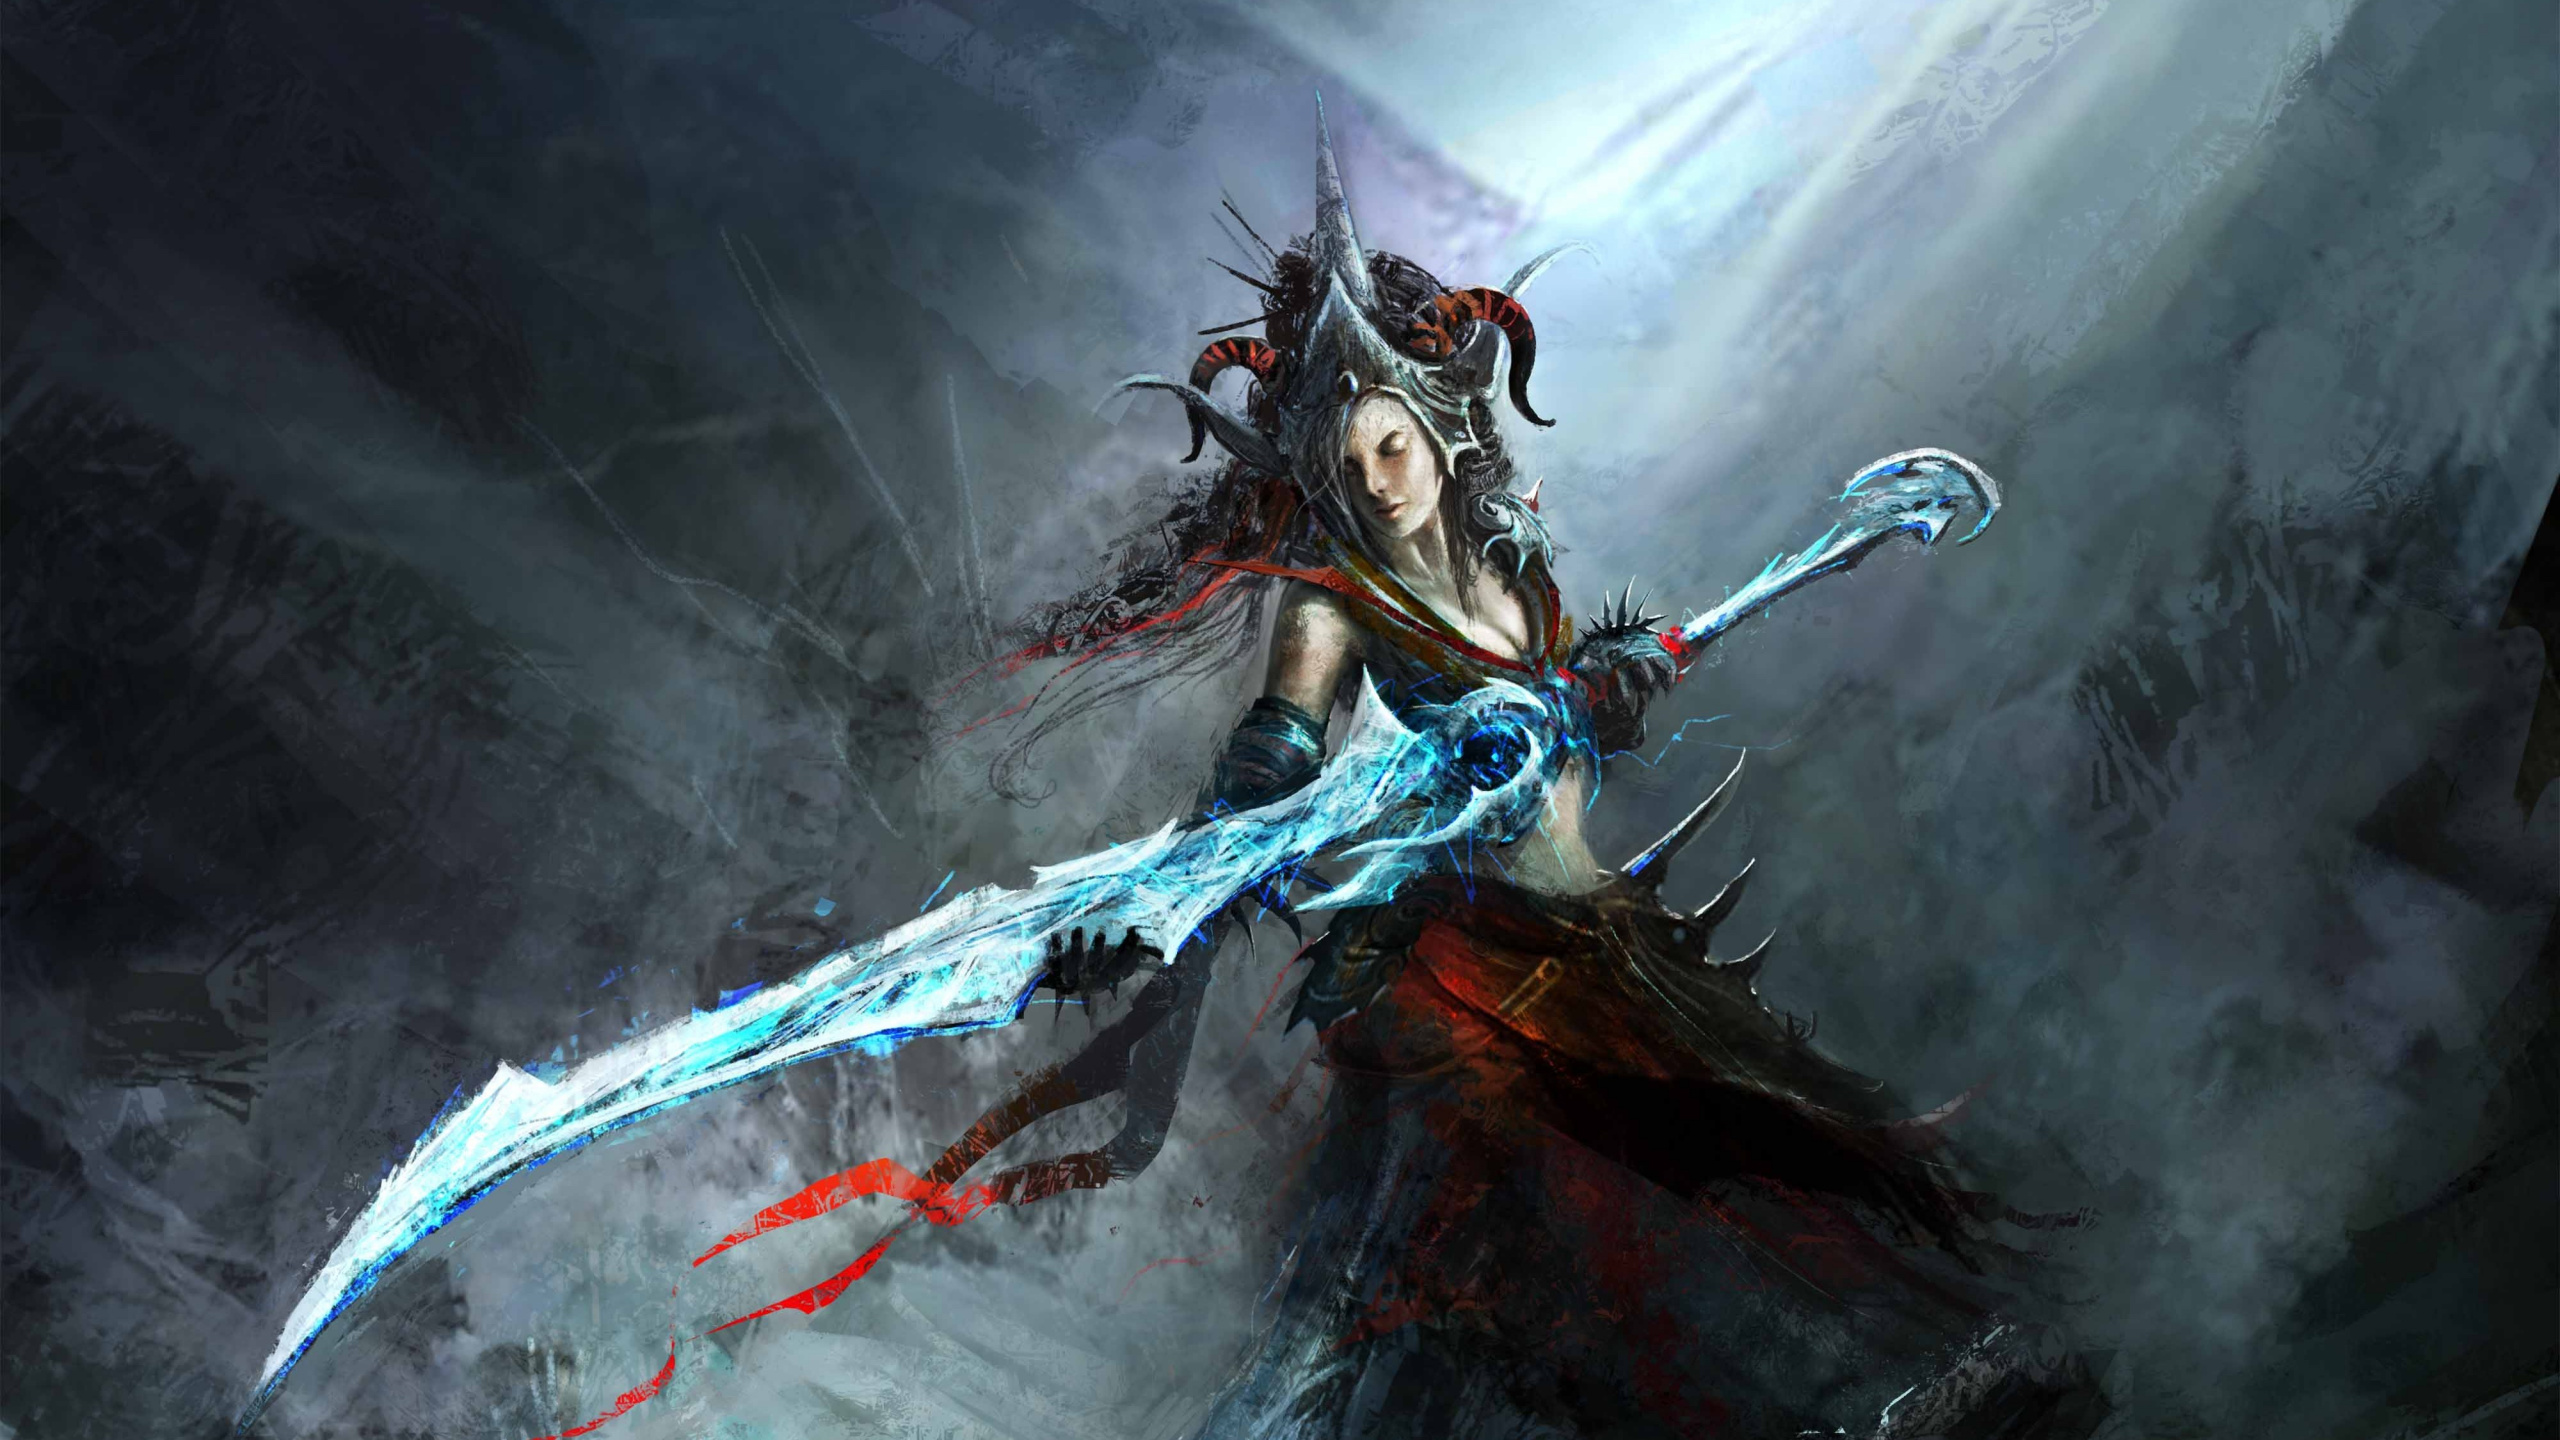 Woman in Blue Dress Holding a Sword Illustration. Wallpaper in 2560x1440 Resolution